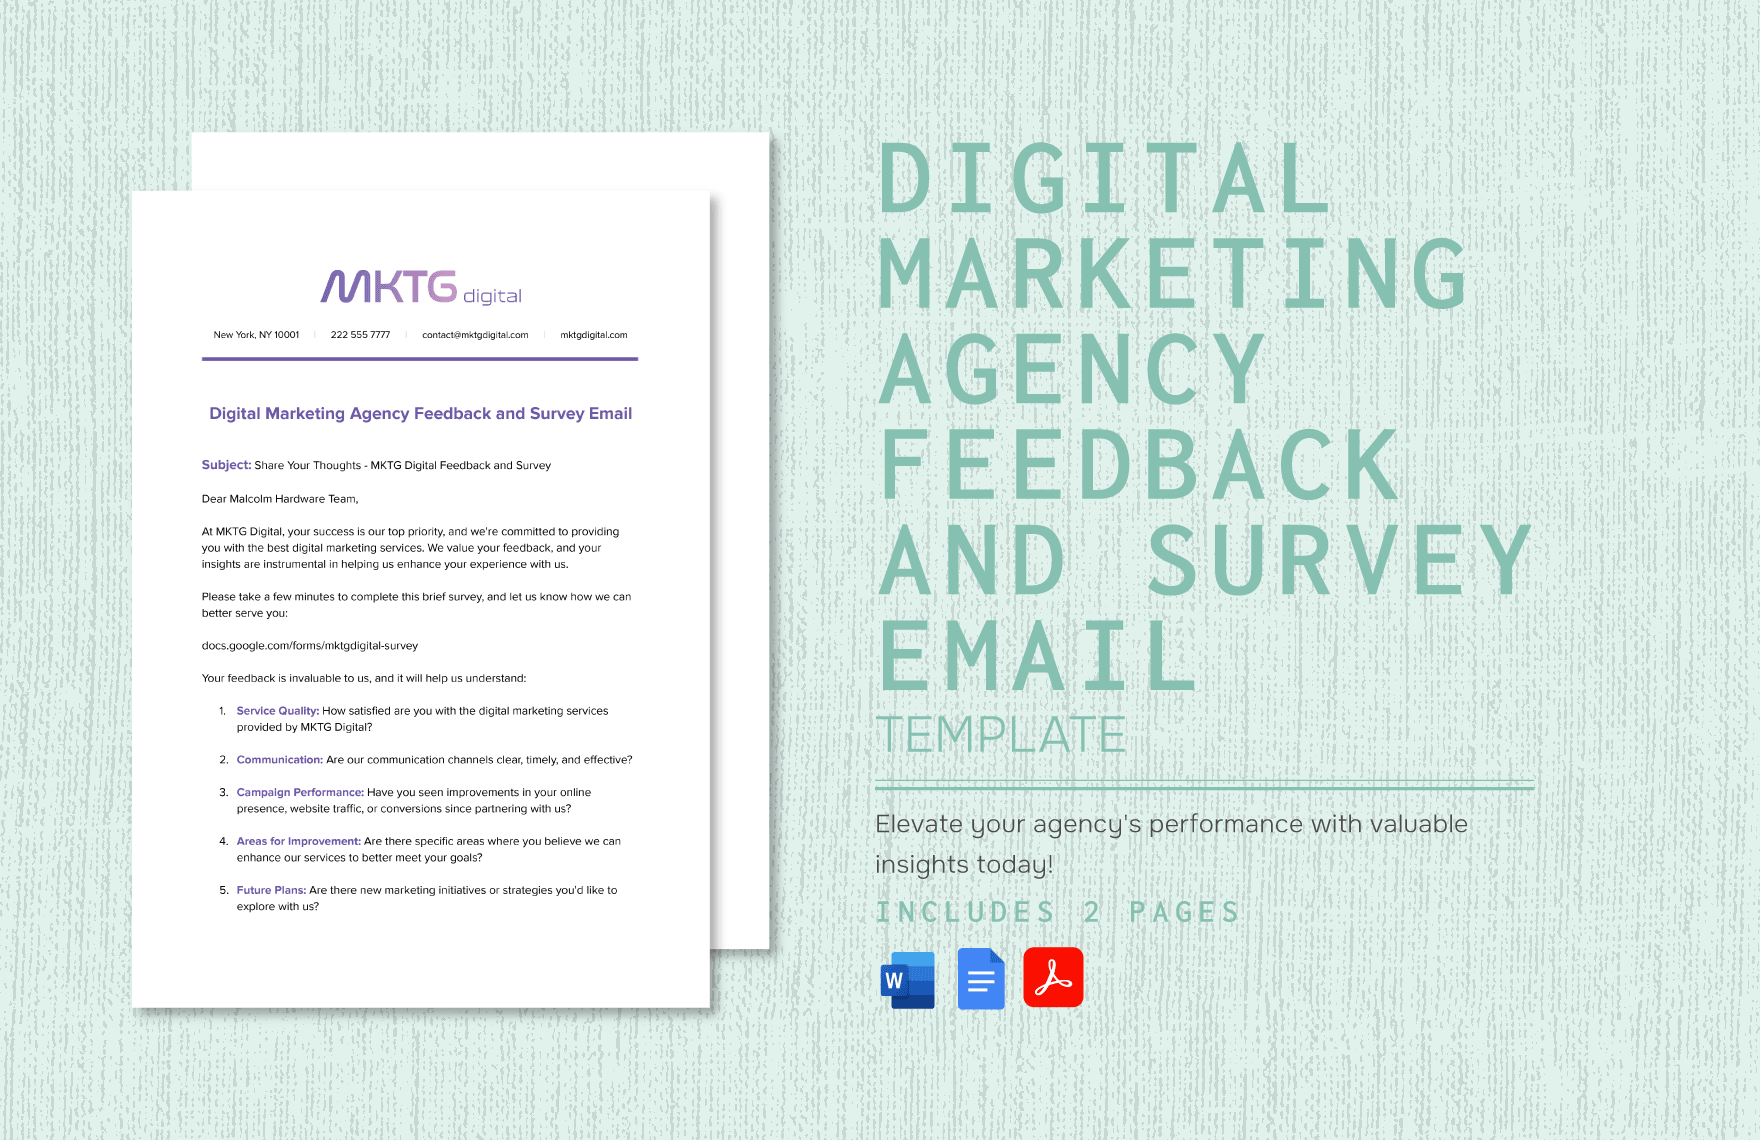 Digital Marketing Agency Feedback and Survey Email Template